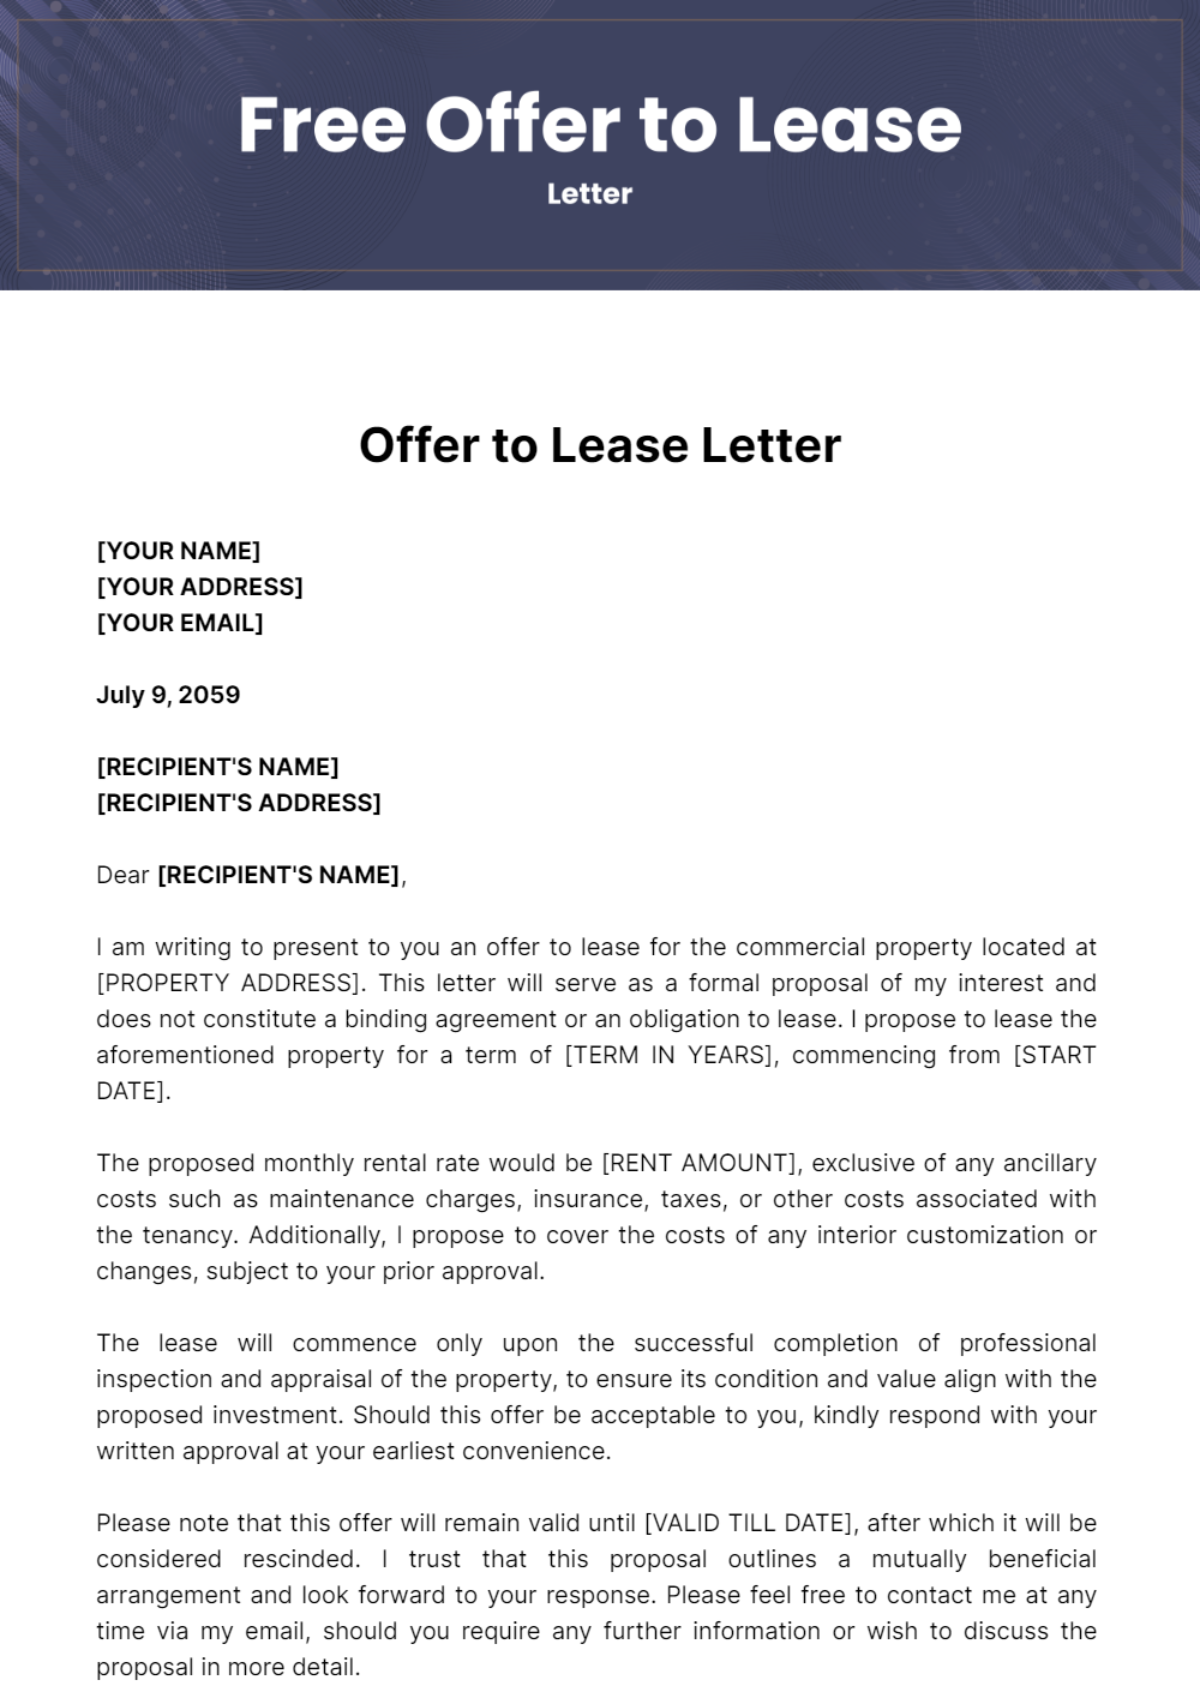 Free Offer to Lease Letter Template